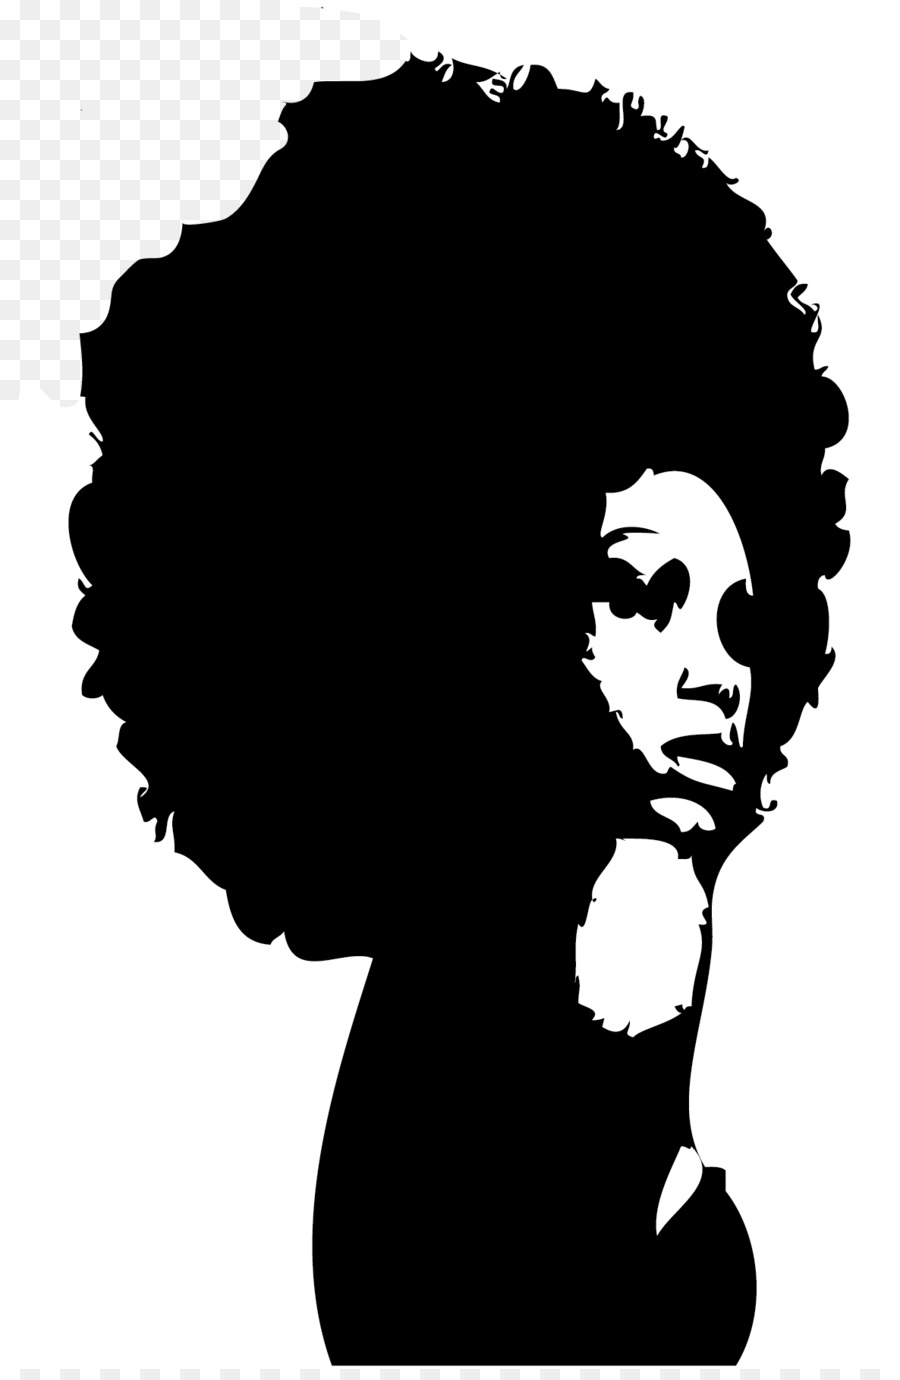 Silhouette Black African American Female Clip art - Afro Lady Cliparts png download - 1186*1804 - Free Transparent Silhouette png Download.